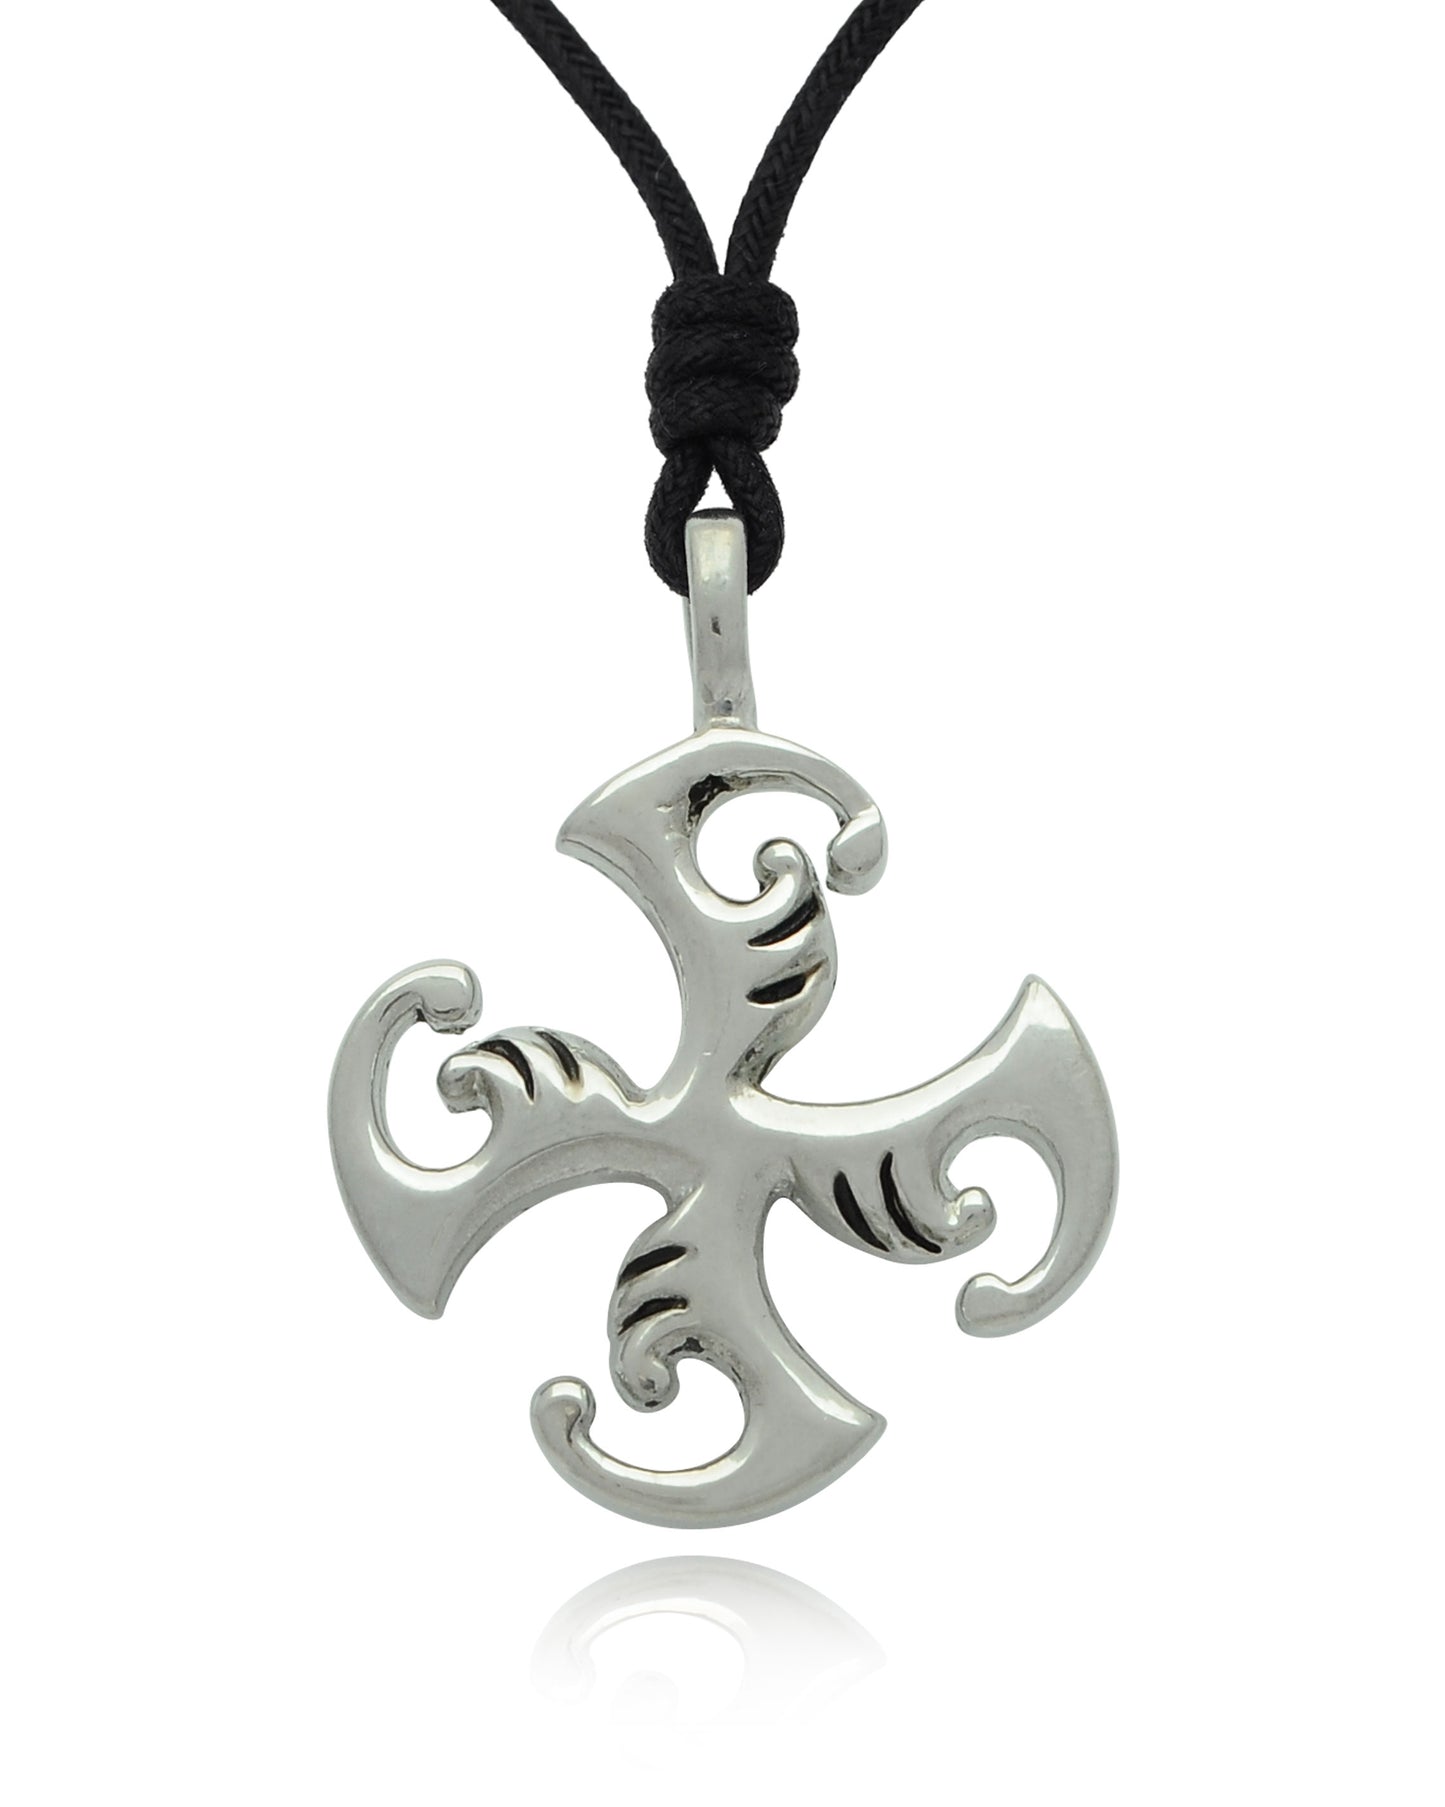 Fashionable Maori Silver Pewter Charm Necklace Pendant Jewelry